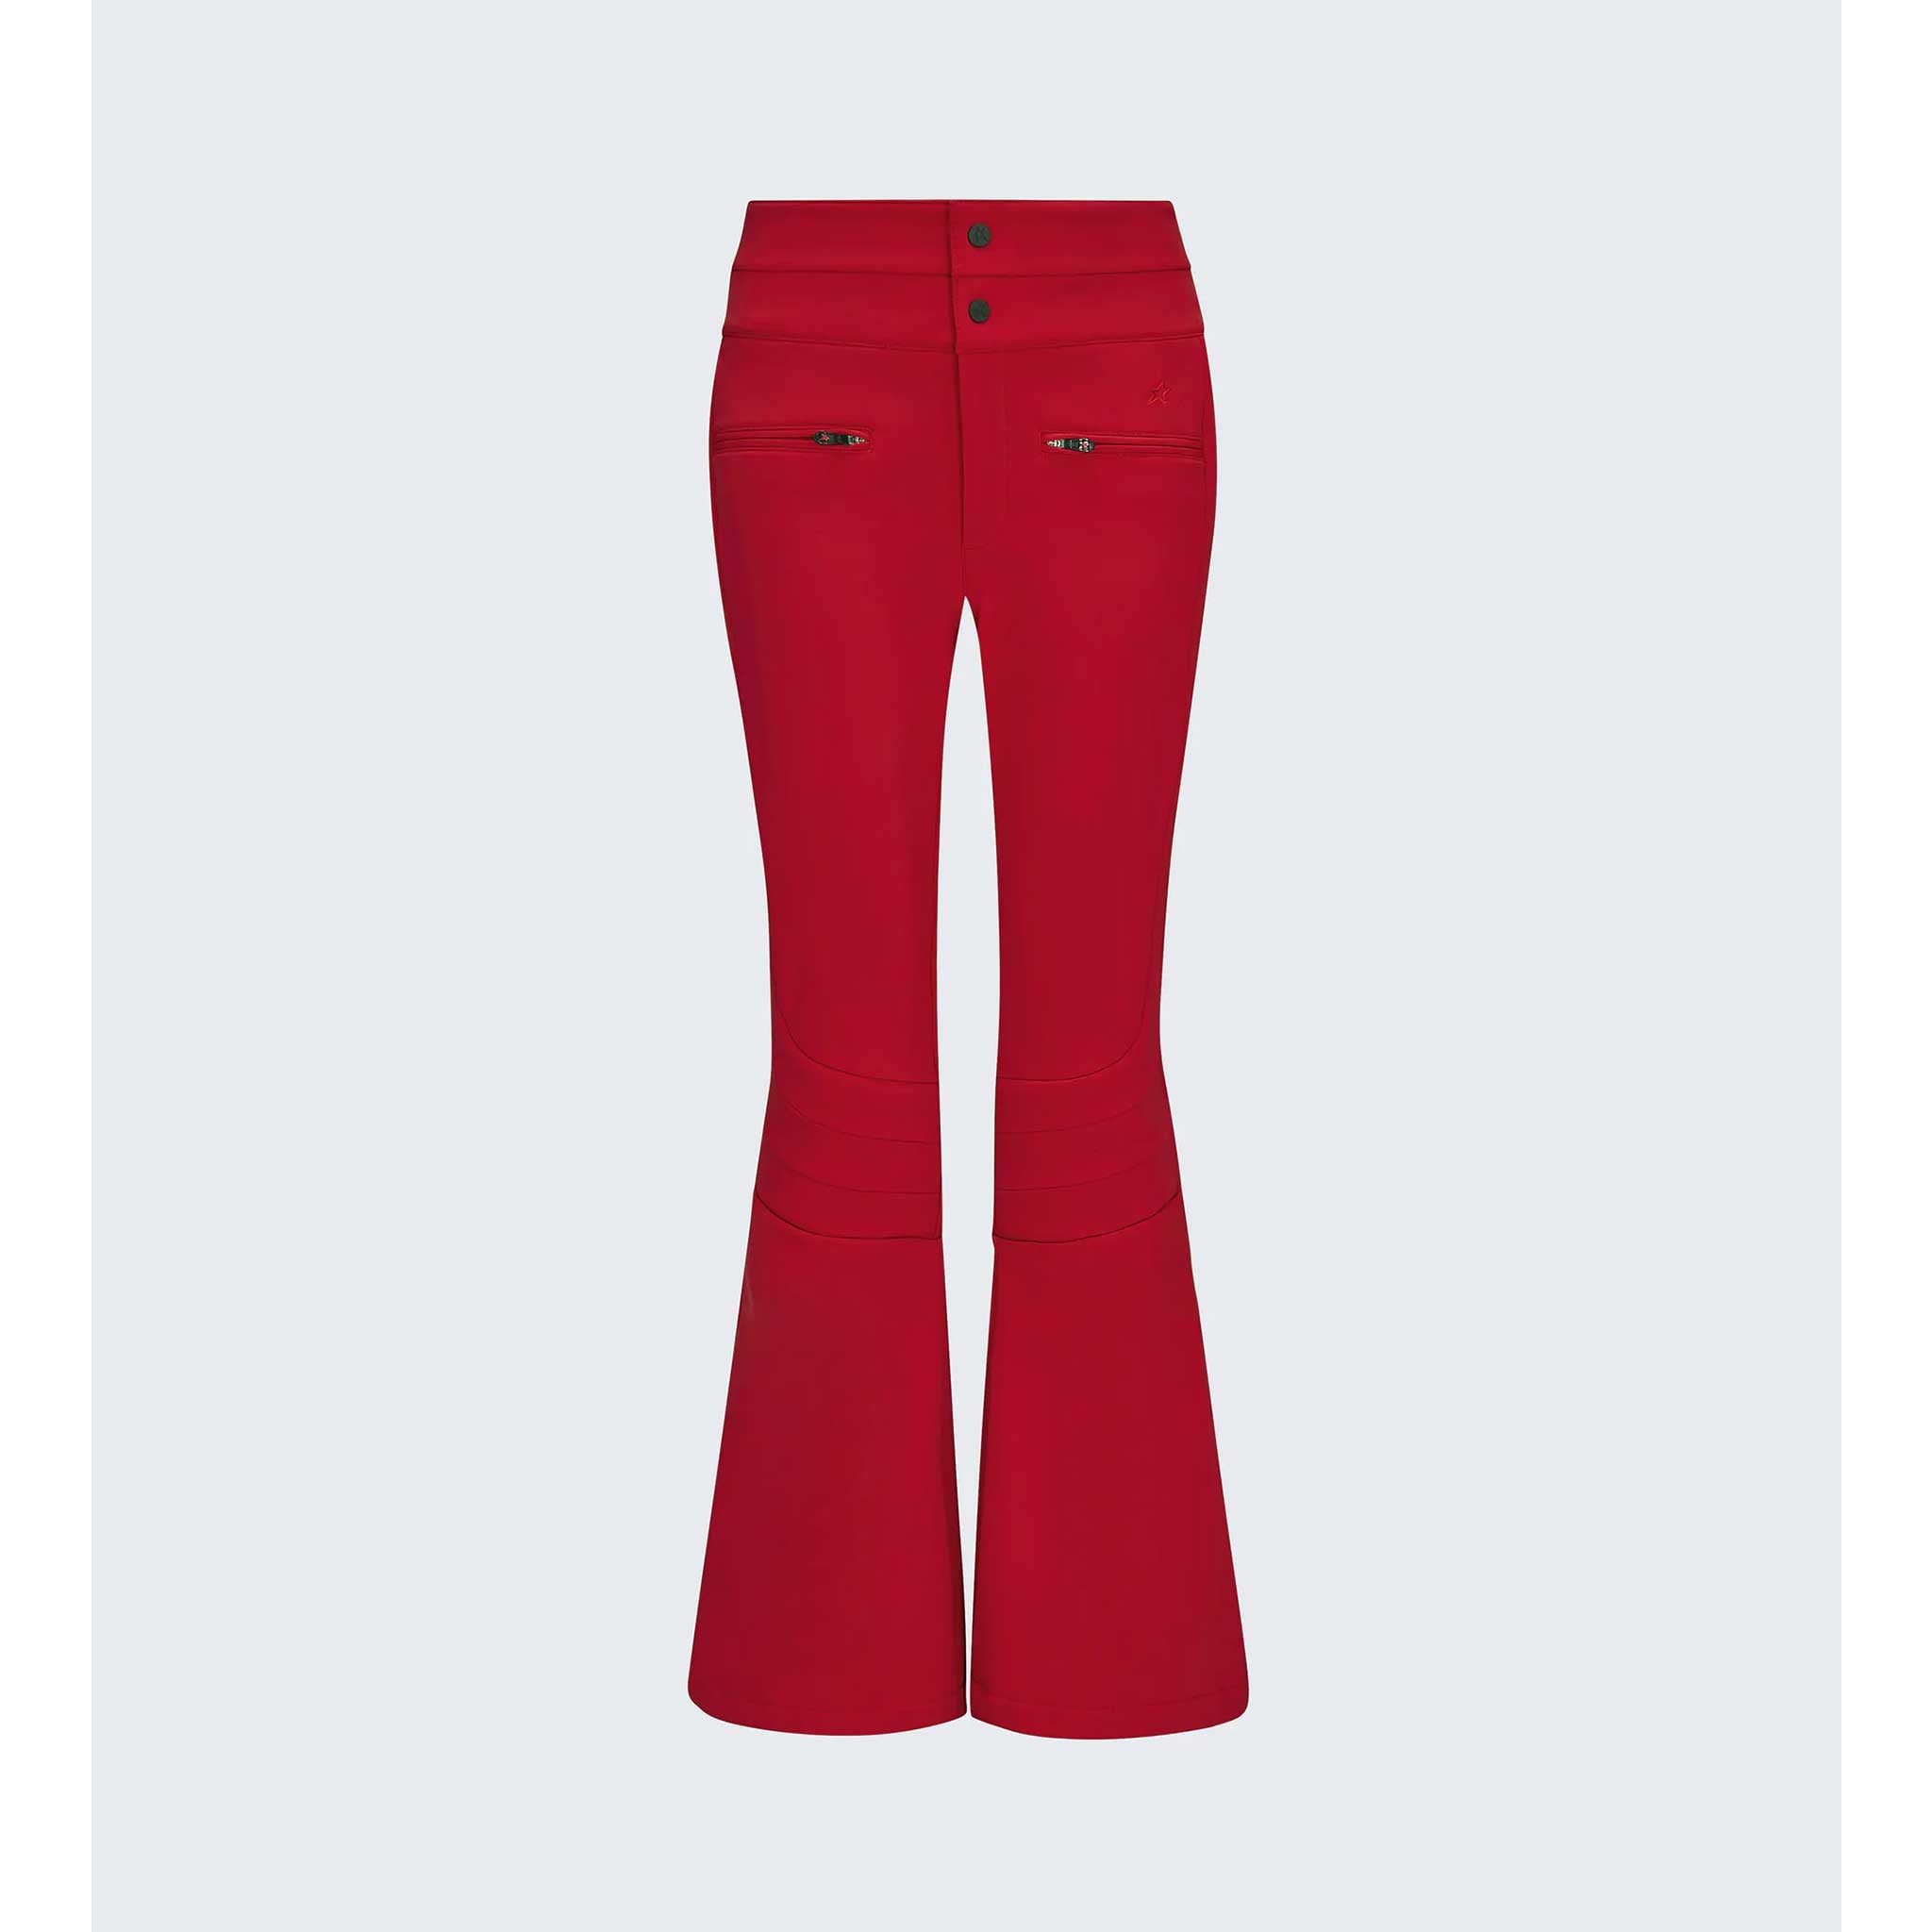 Aurora High Waist Flare Pant in Red by Perfect Moment